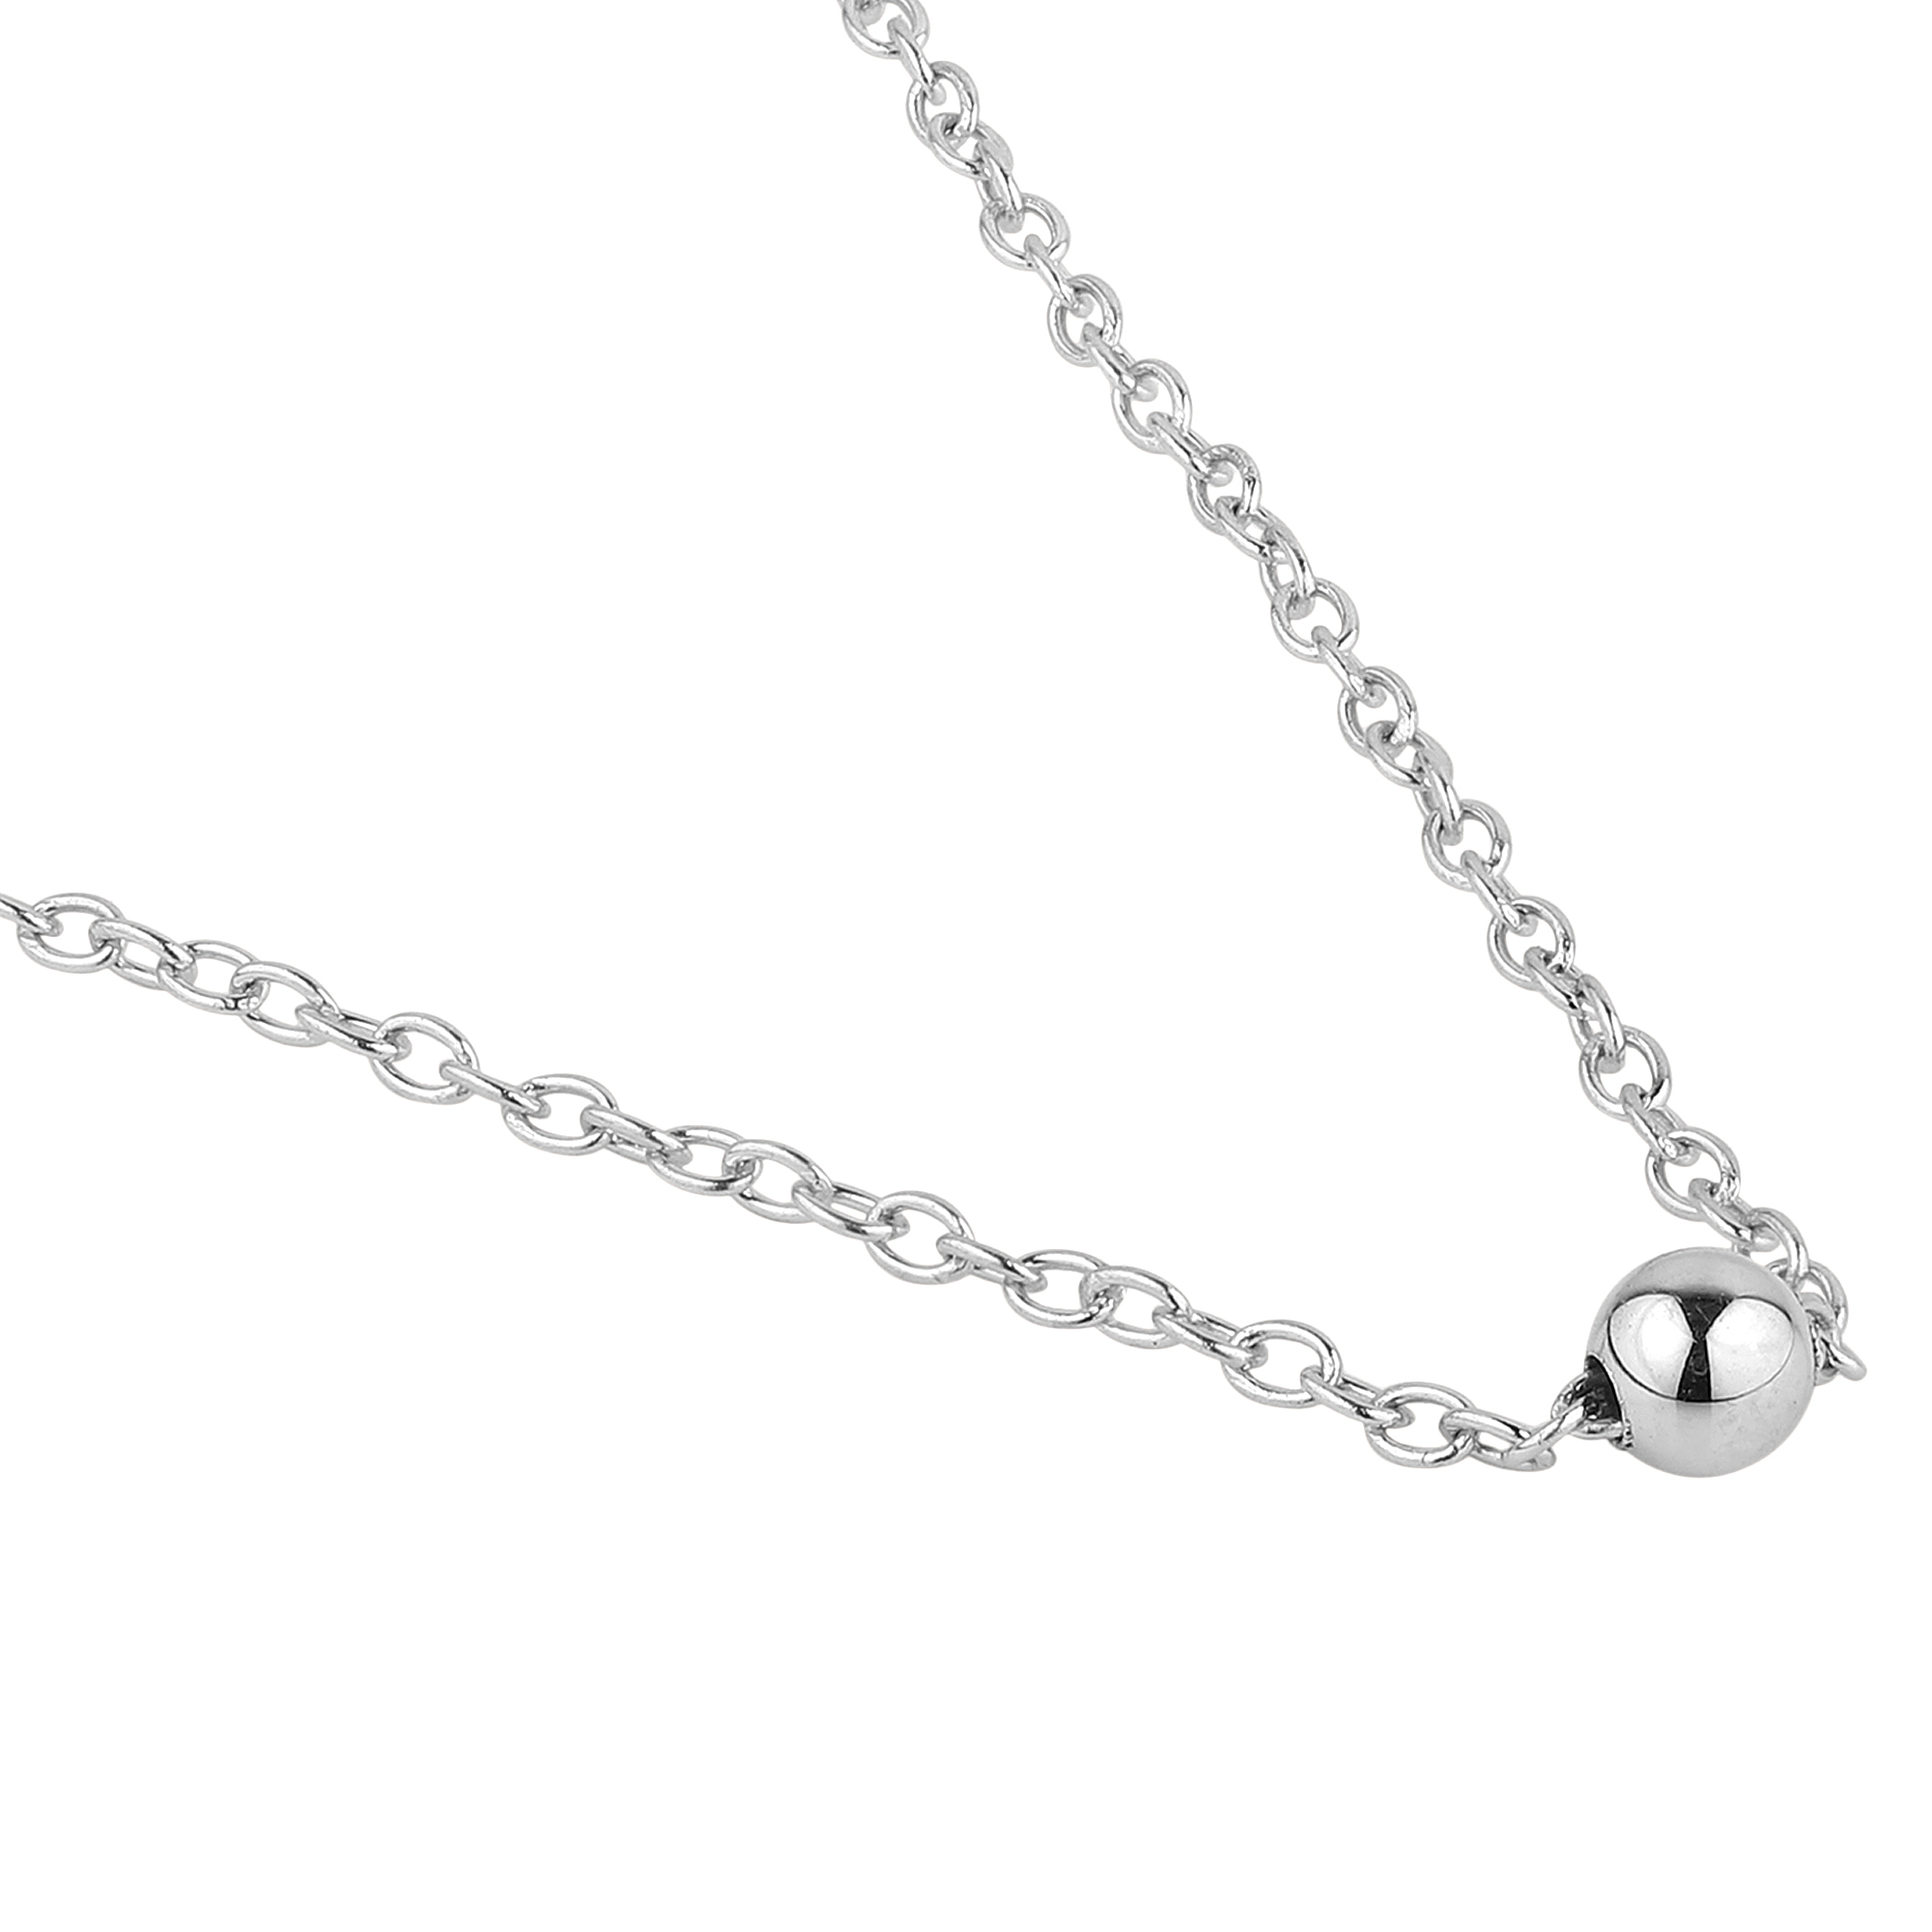 4mm Ball necklace in 925 sterling silver